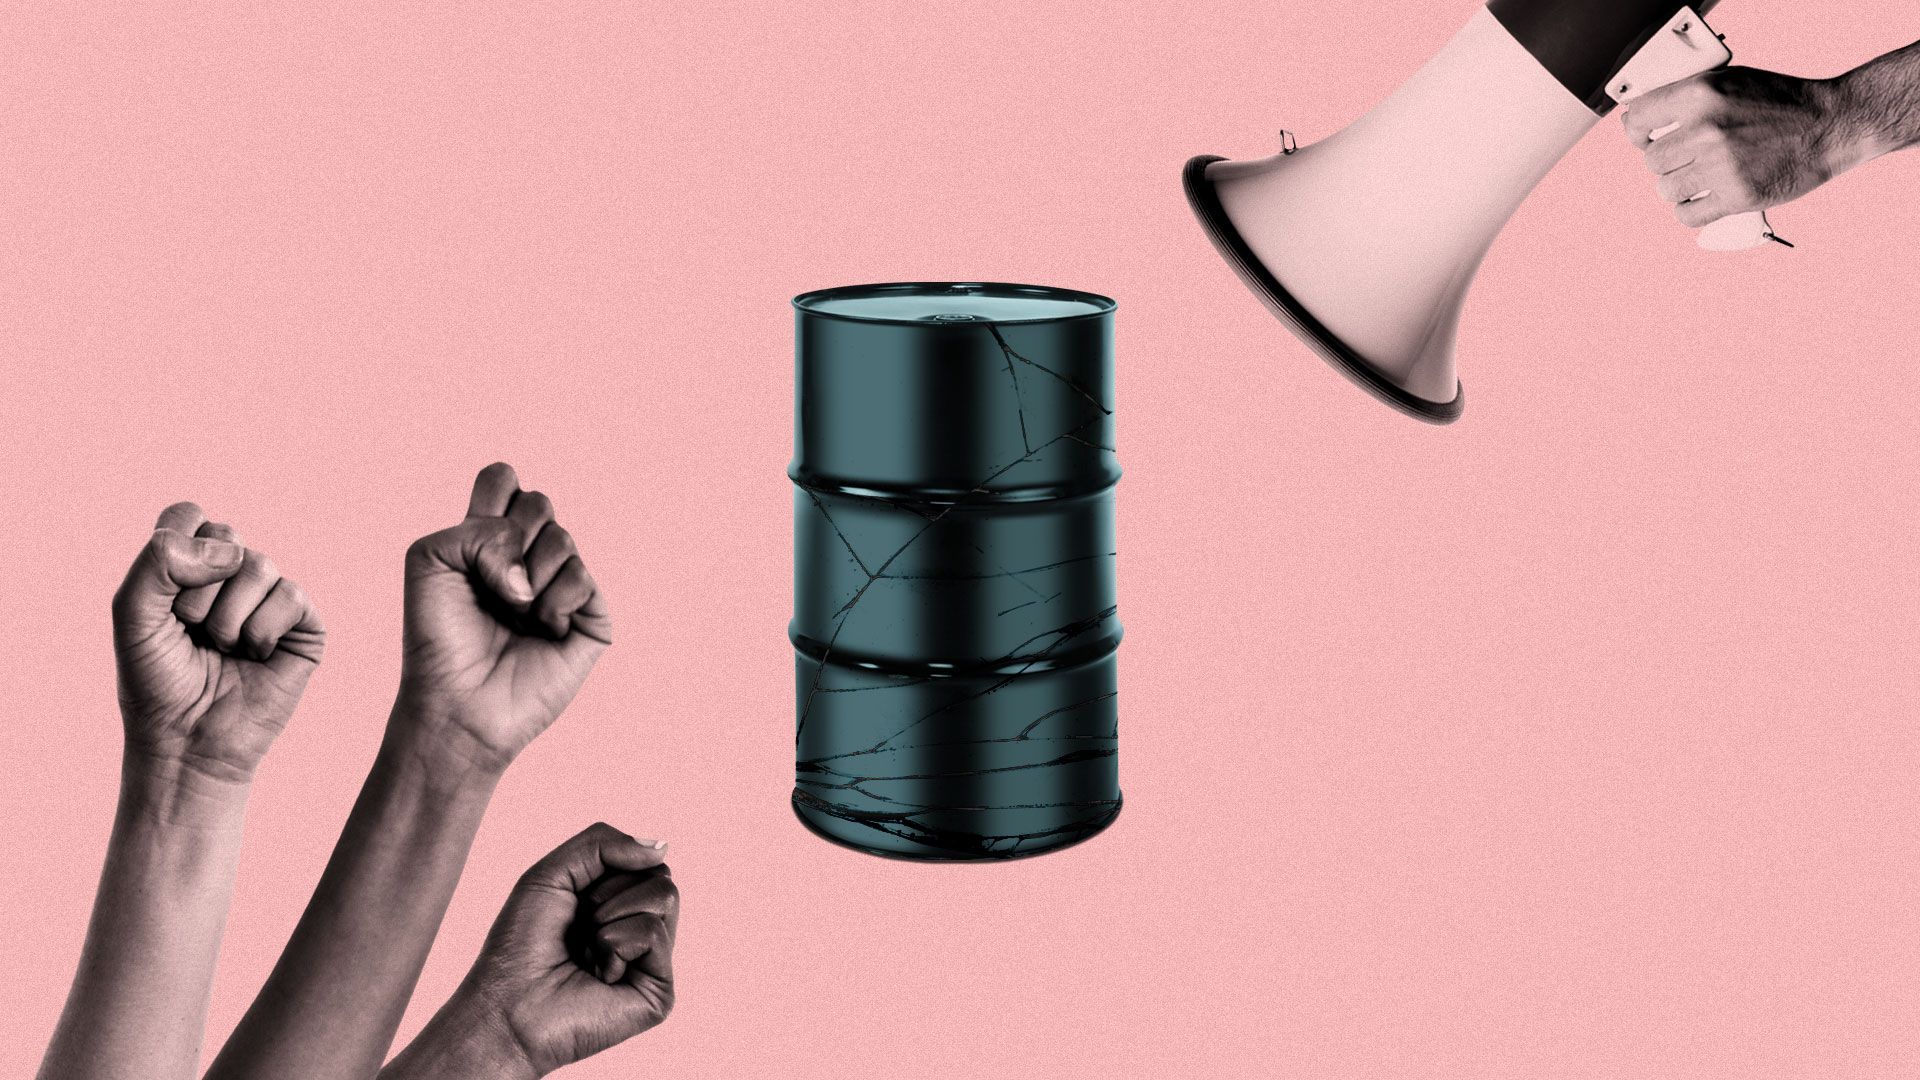 Illustration of cracking oil barrel with fists and megaphone.